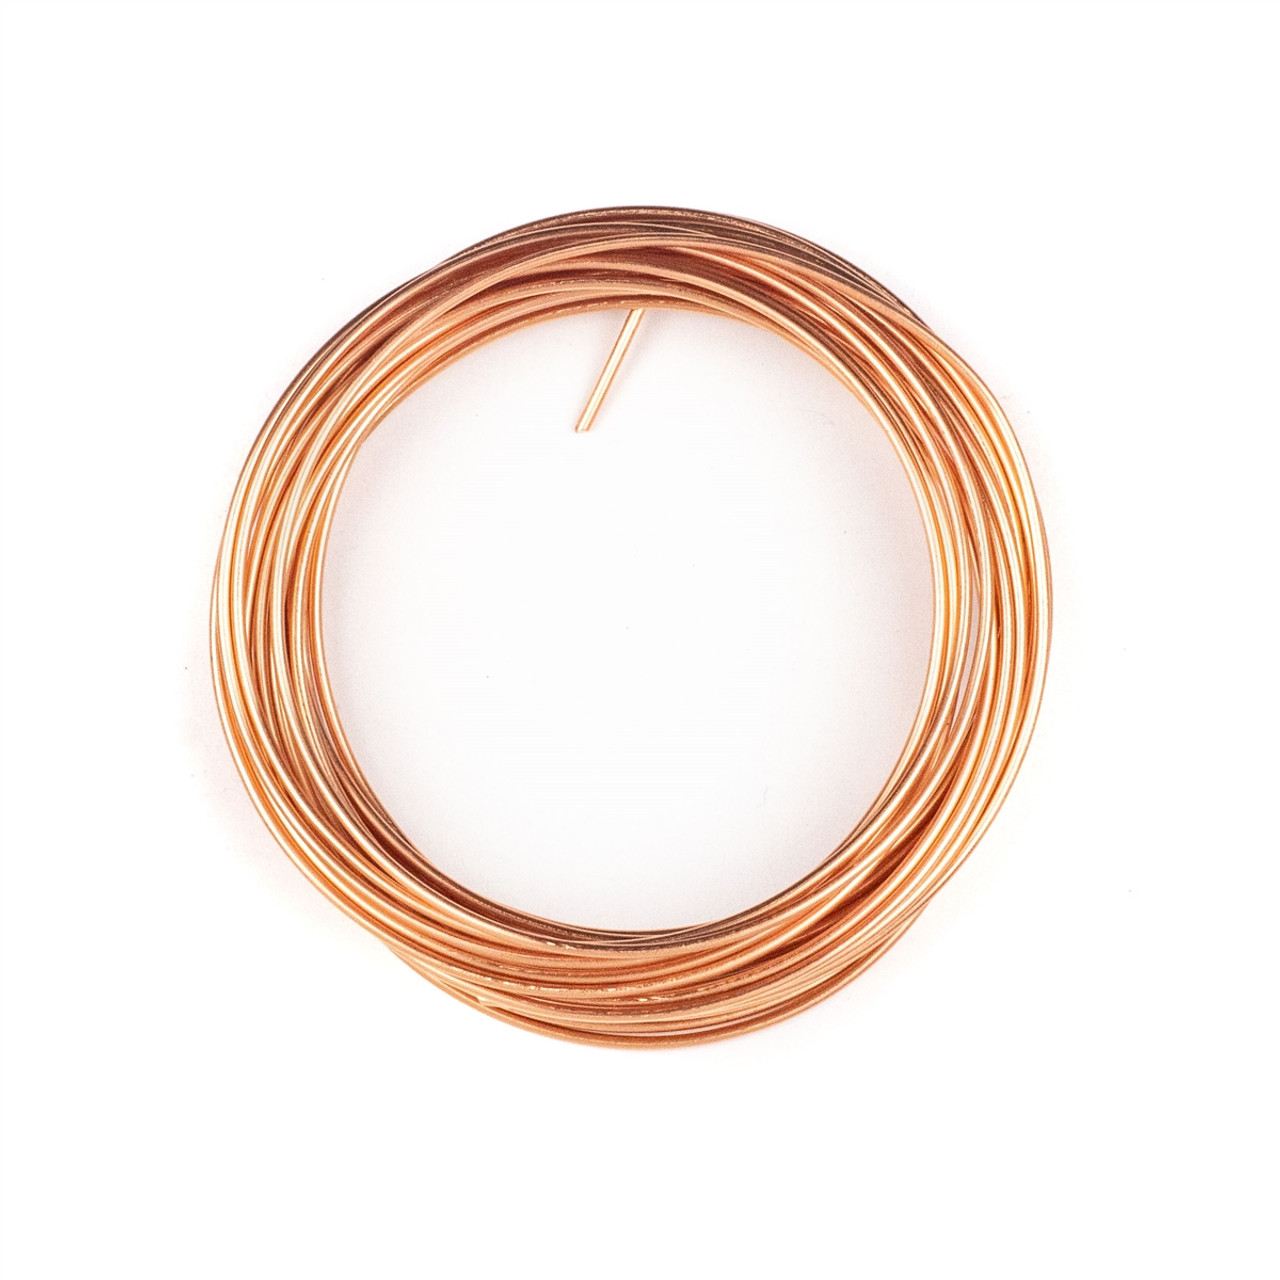 16 Gauge Coated Non-Tarnish Copper Wire in 15 Foot Coil